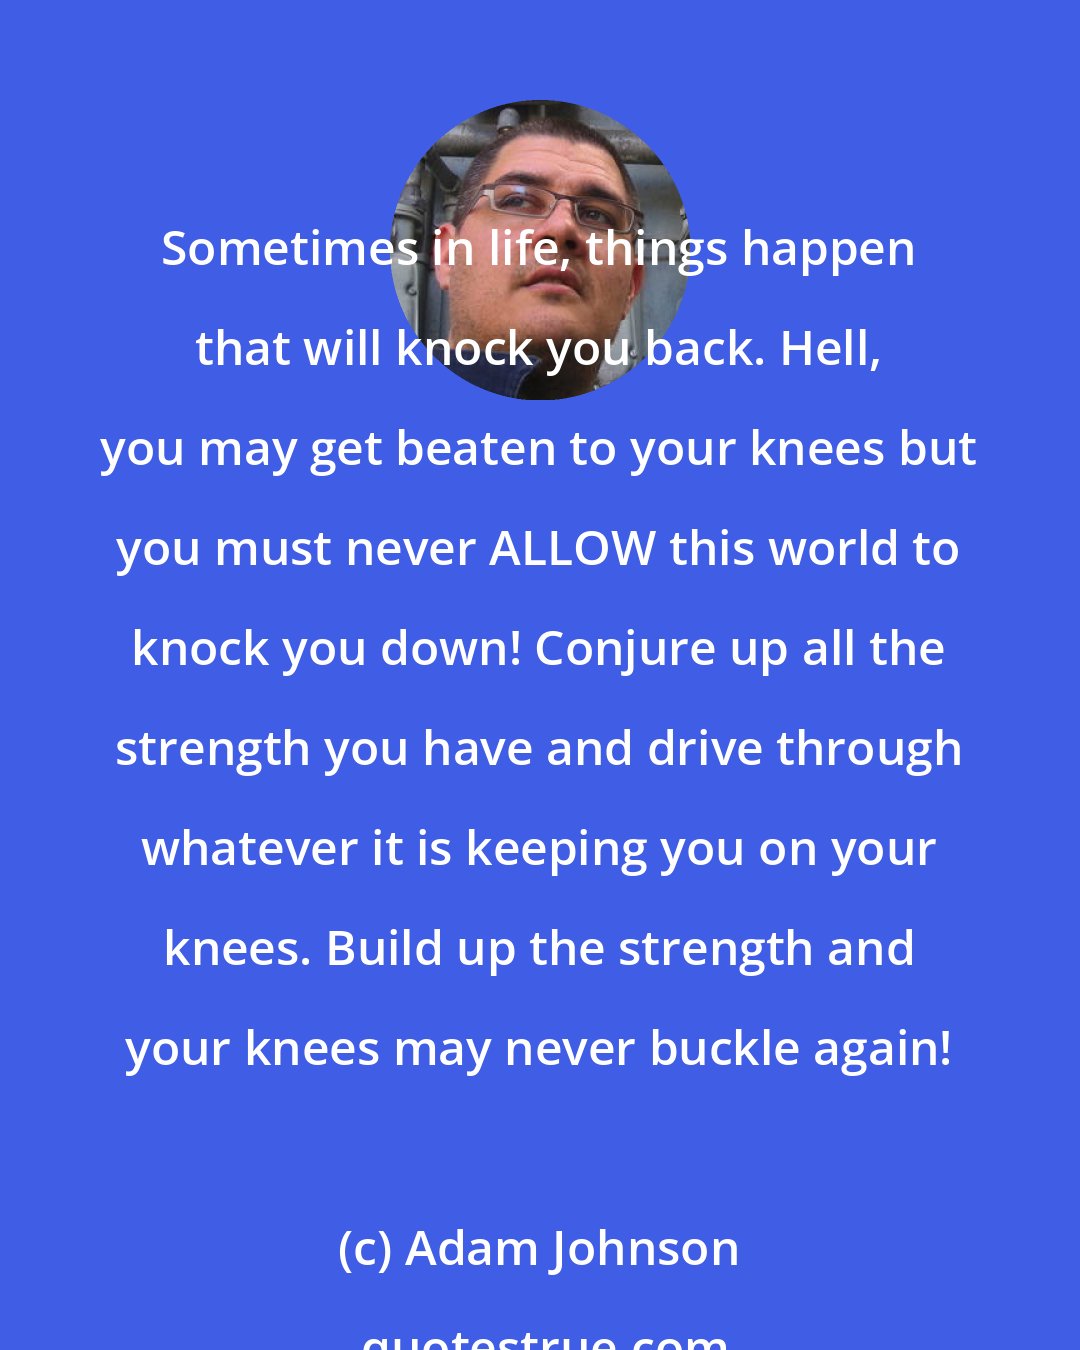 Adam Johnson: Sometimes in life, things happen that will knock you back. Hell, you may get beaten to your knees but you must never ALLOW this world to knock you down! Conjure up all the strength you have and drive through whatever it is keeping you on your knees. Build up the strength and your knees may never buckle again!